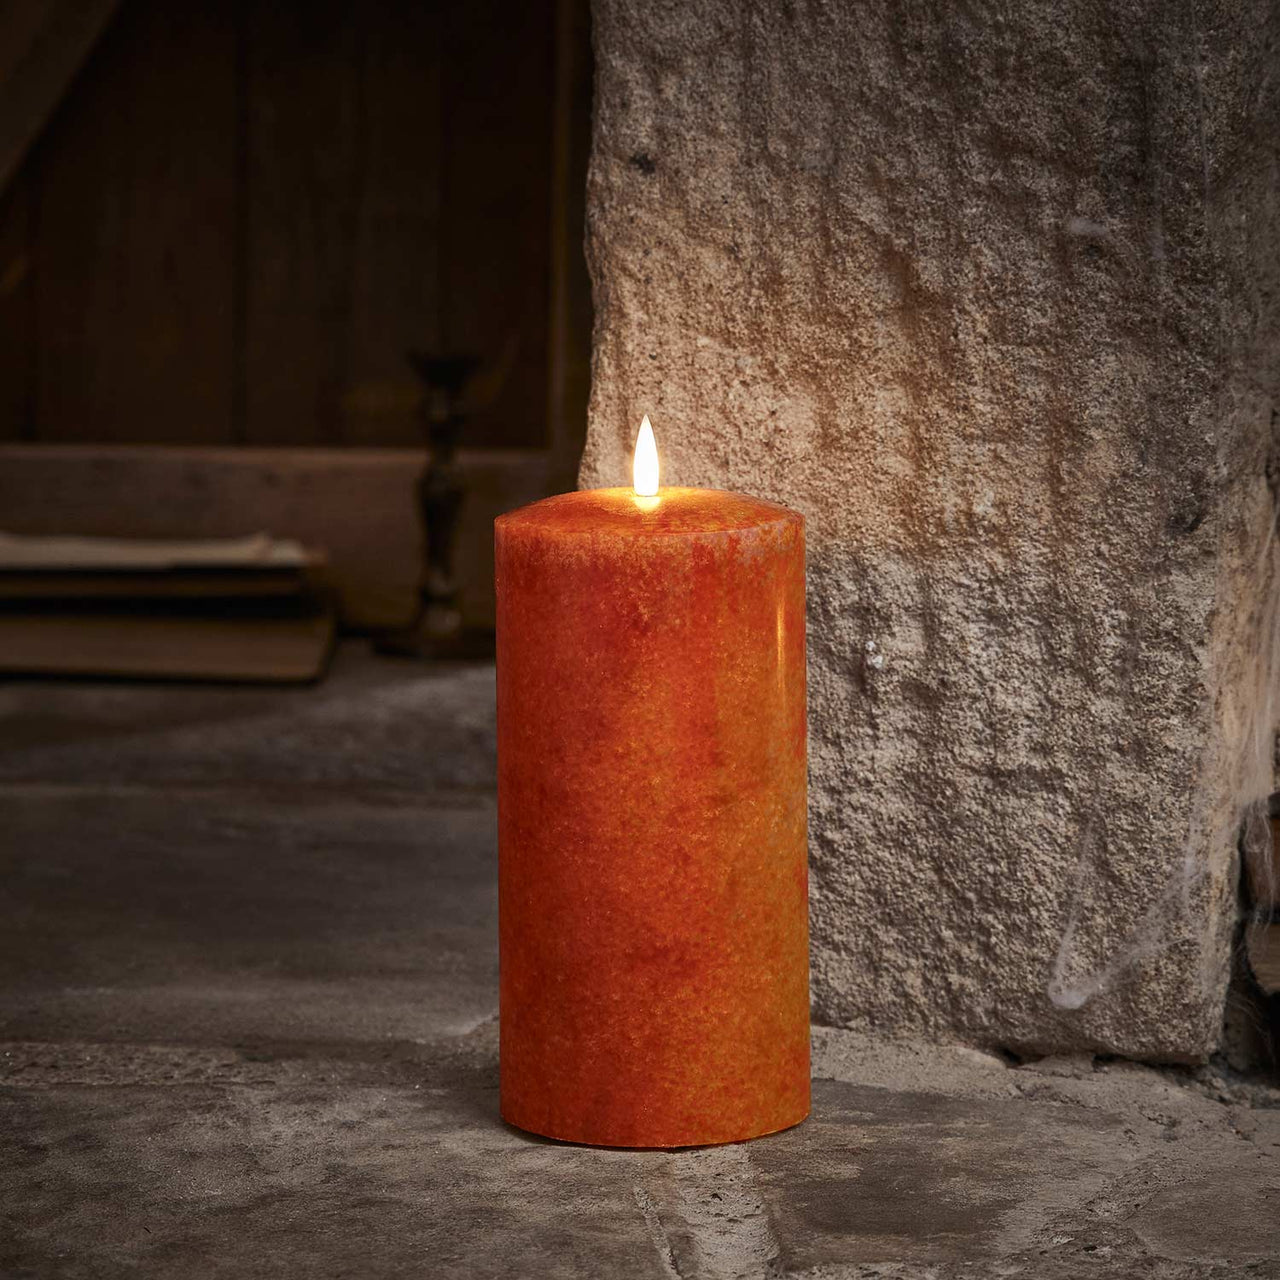 20cm TruGlow® Mottled Orange LED Chapel Candle with Remote Control